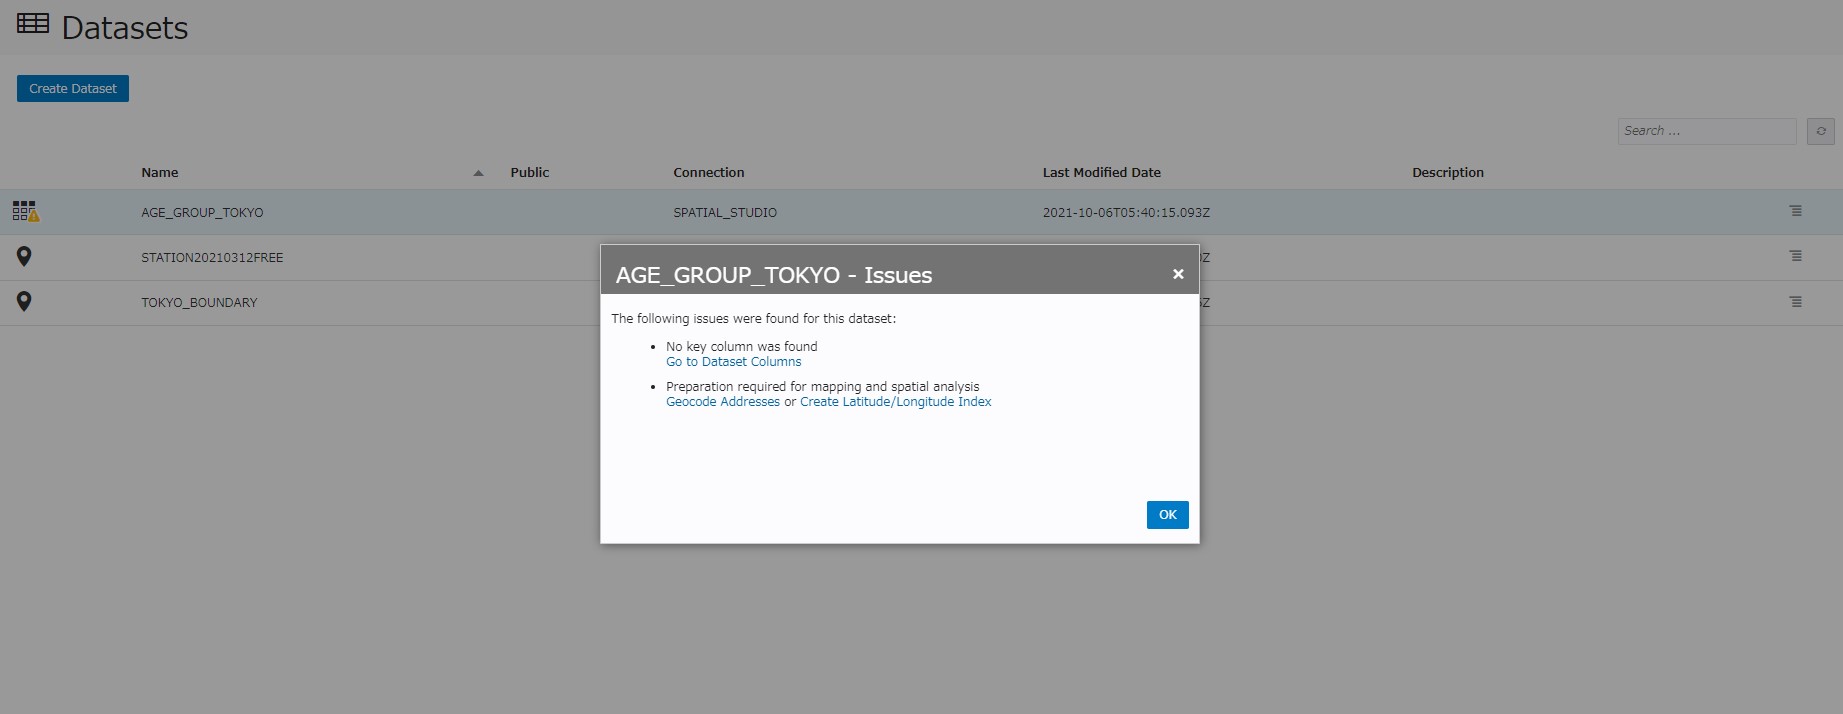 age_group_tokyo_issuesイメージ